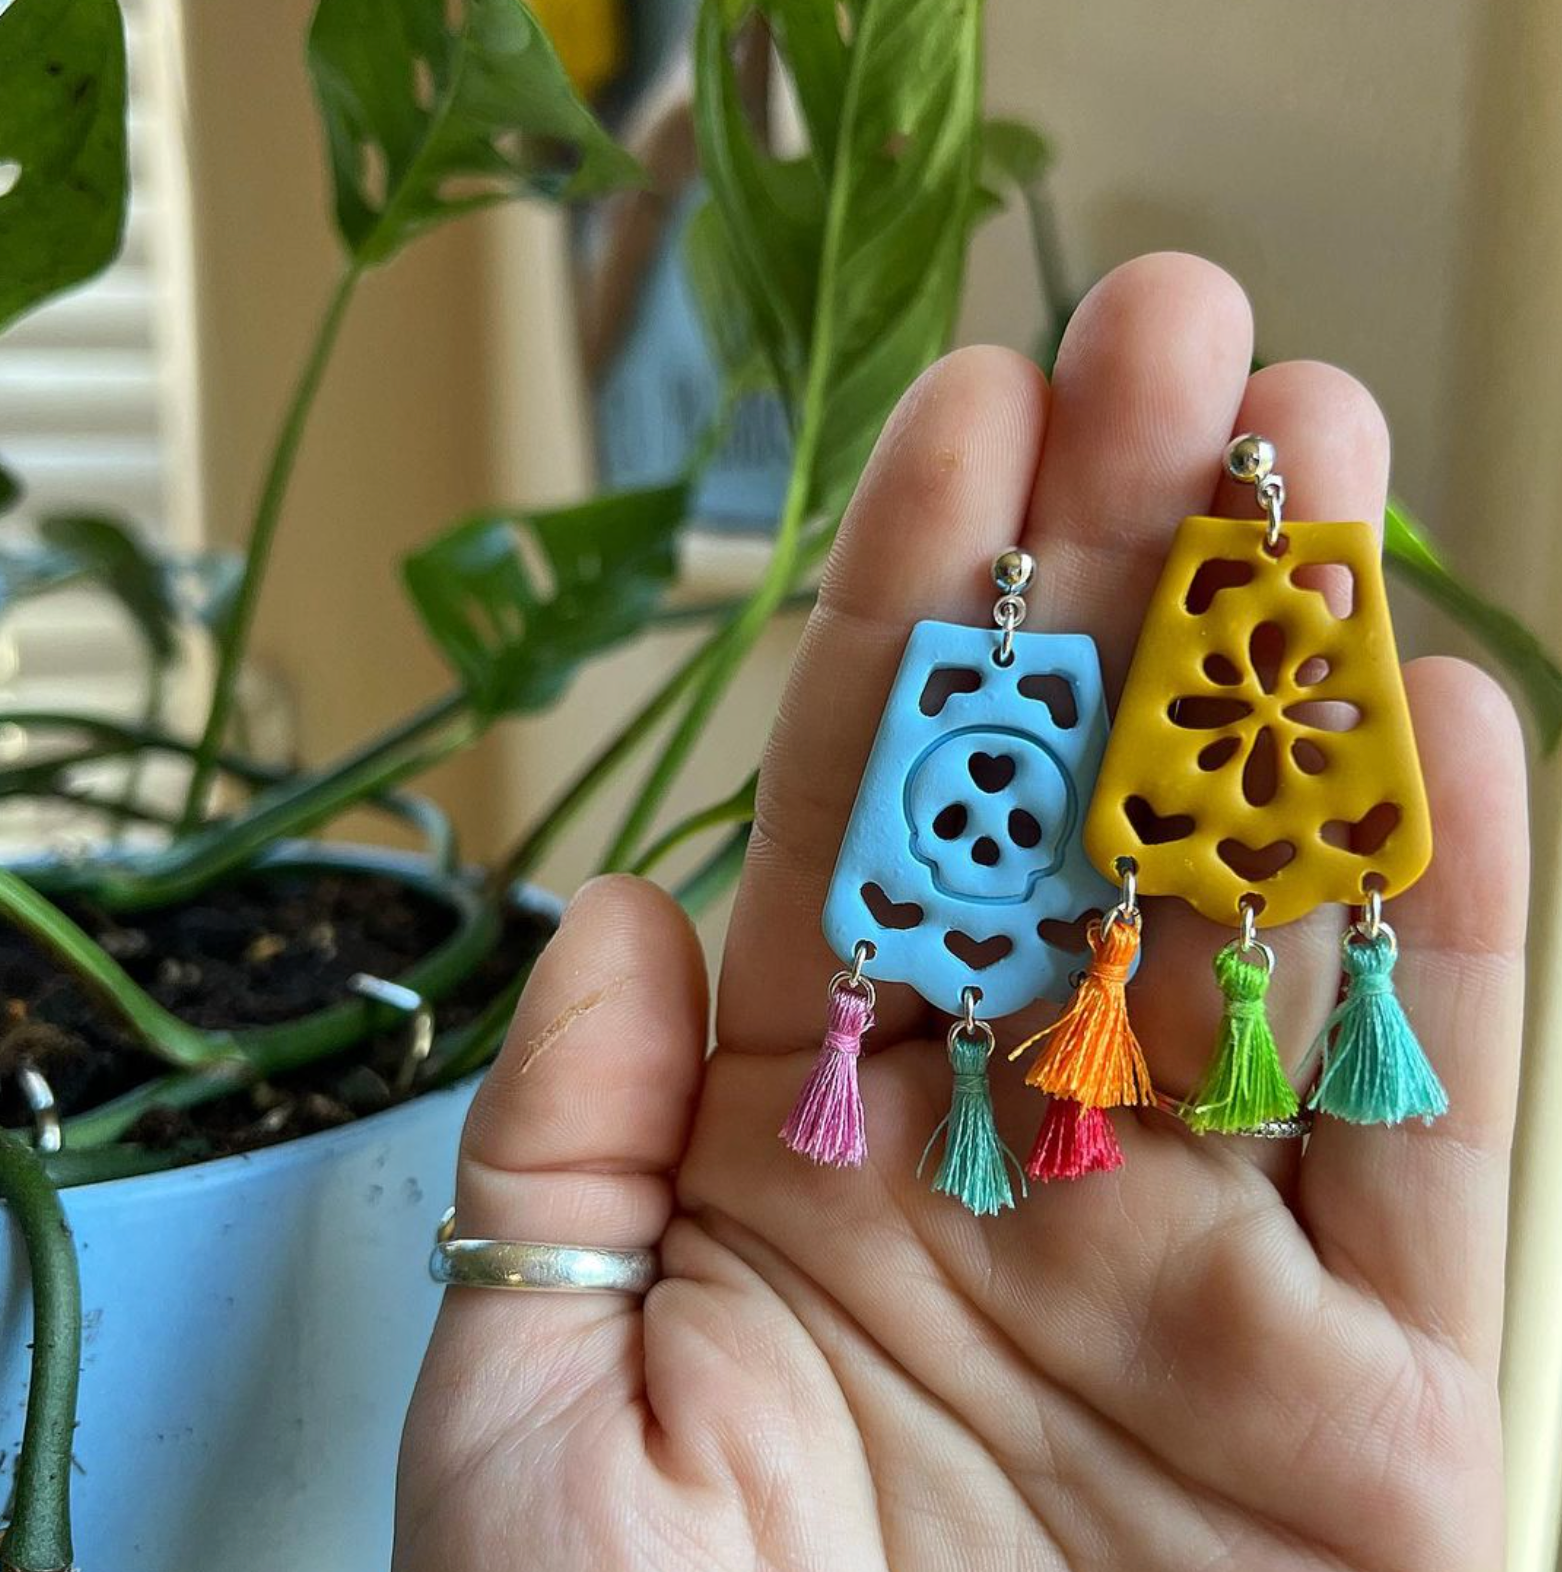 Colorful polymer clay earrings